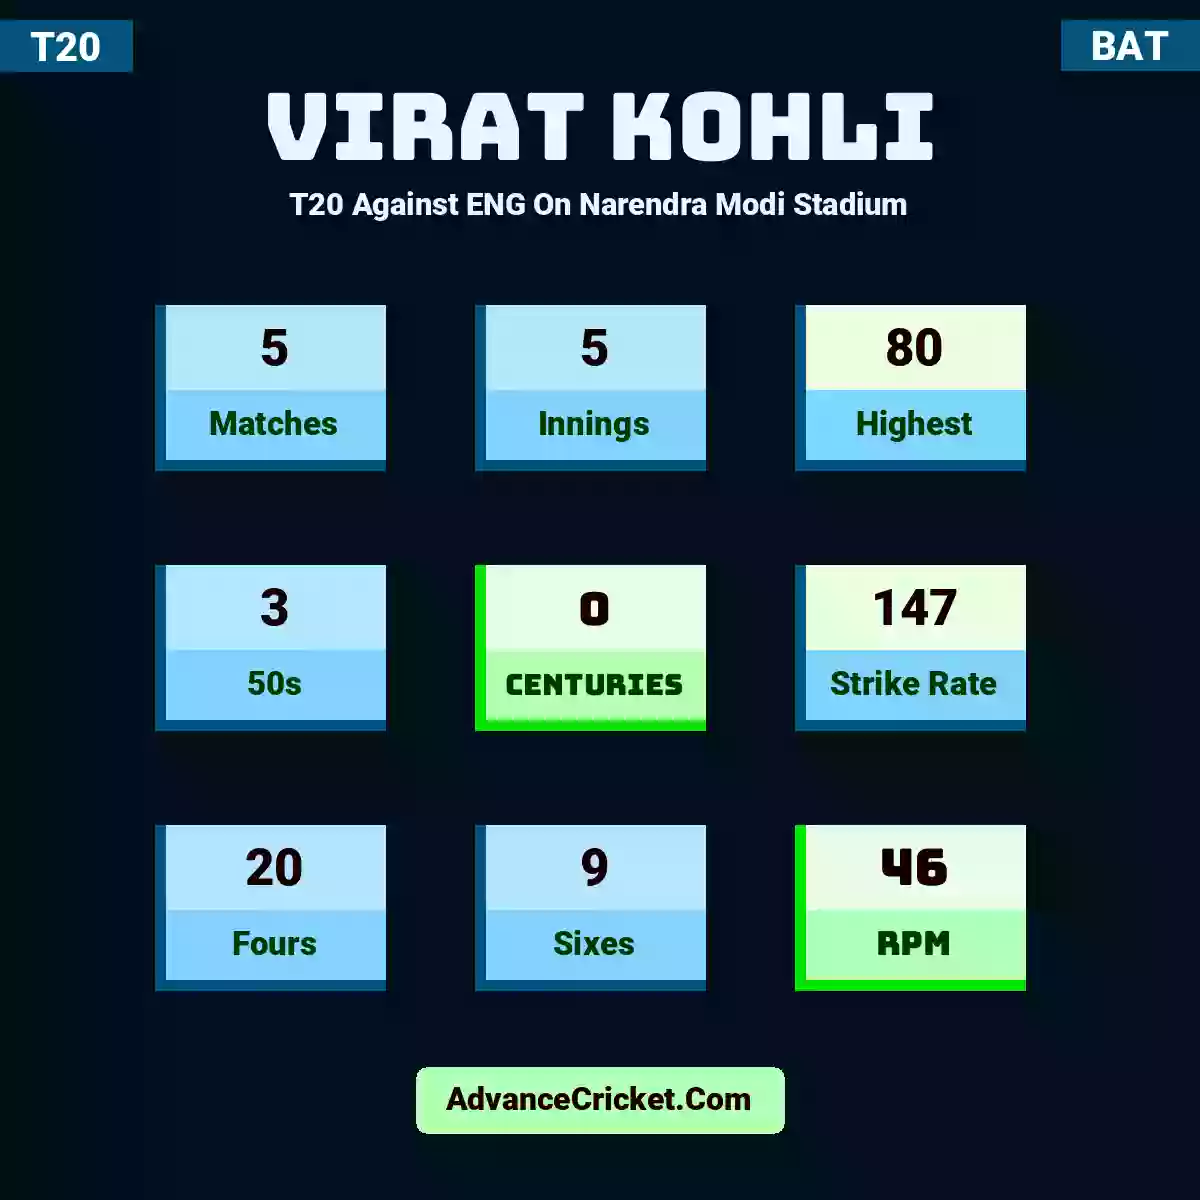 Virat Kohli T20  Against ENG On Narendra Modi Stadium, Virat Kohli played 5 matches, scored 80 runs as highest, 3 half-centuries, and 0 centuries, with a strike rate of 147. V.Kohli hit 20 fours and 9 sixes, with an RPM of 46.